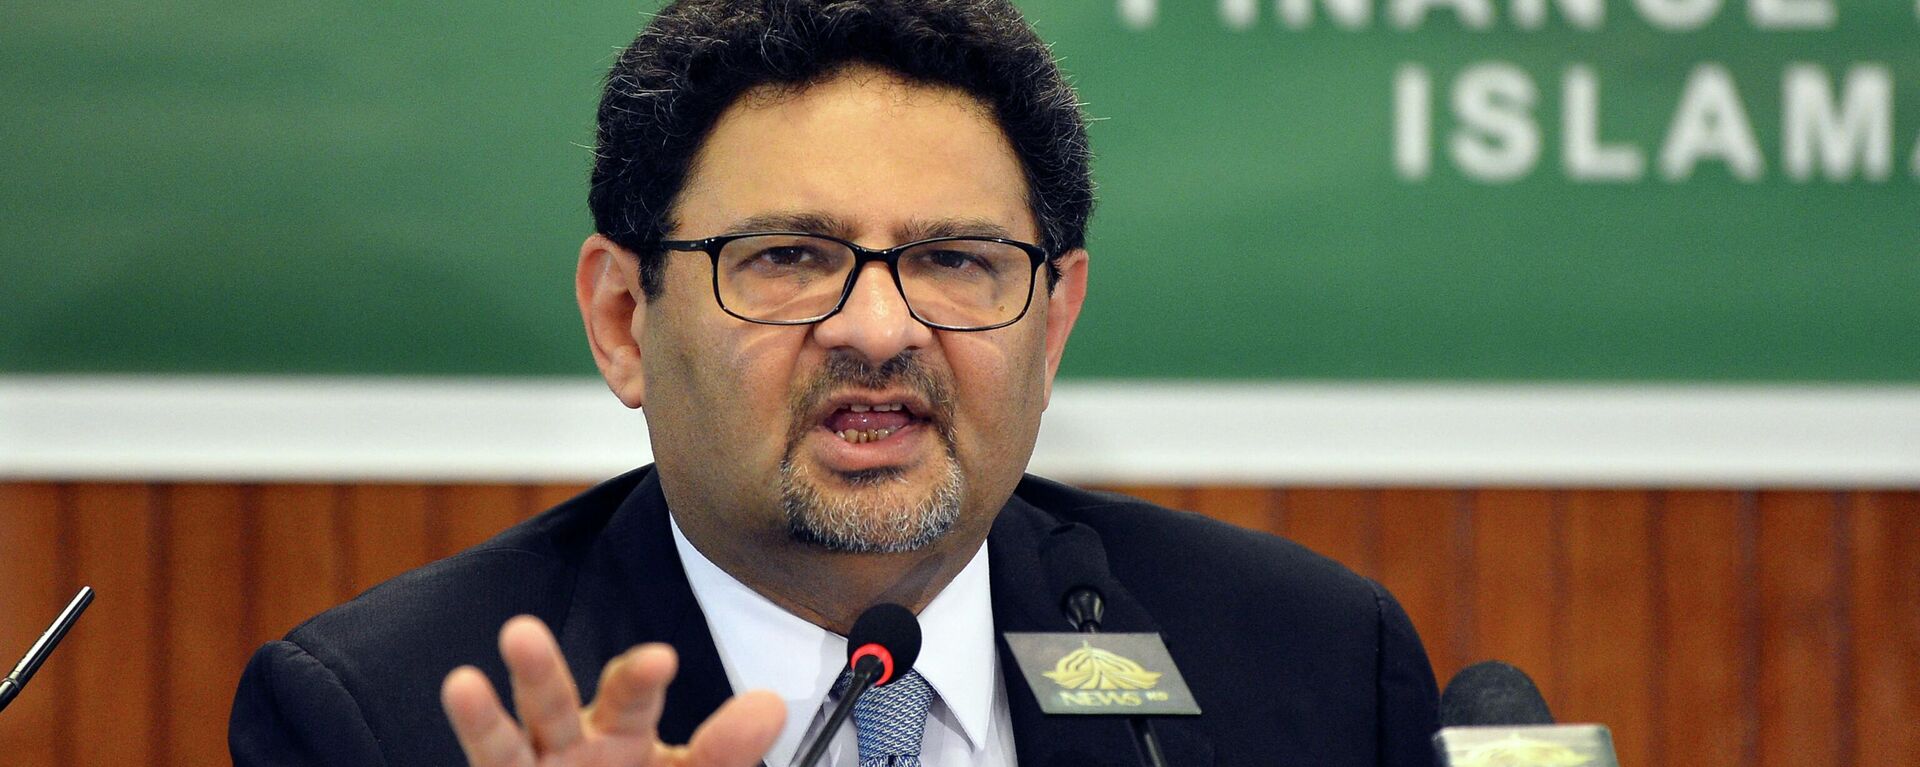 Pakistan's Finance Minister Miftah Ismail speaks during the launch ceremony of 'Economy Survey 2021-22' in Islamabad on June 9, 2022 - Sputnik International, 1920, 26.09.2022